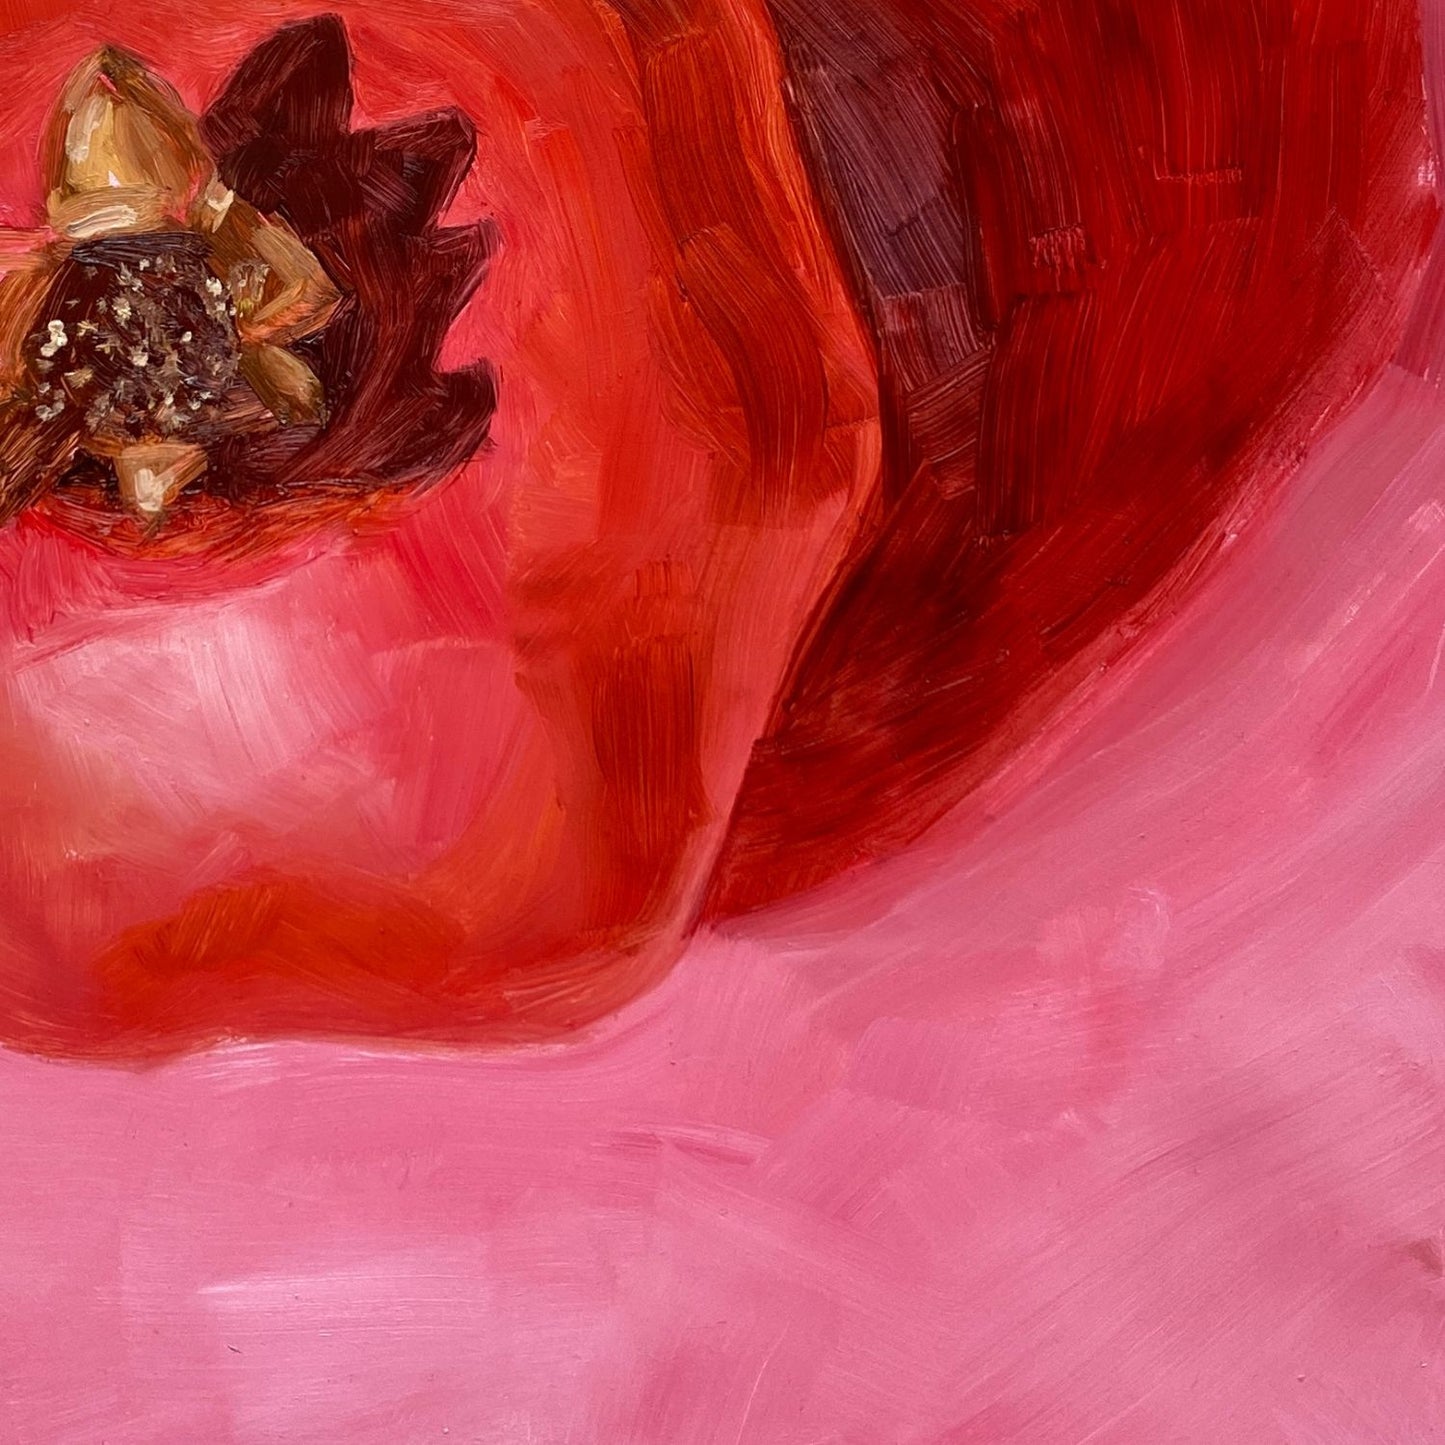 closeup of an original oil painting of a bright and vibrant red pomegranate with a strong reddish shadow on a textured pink background